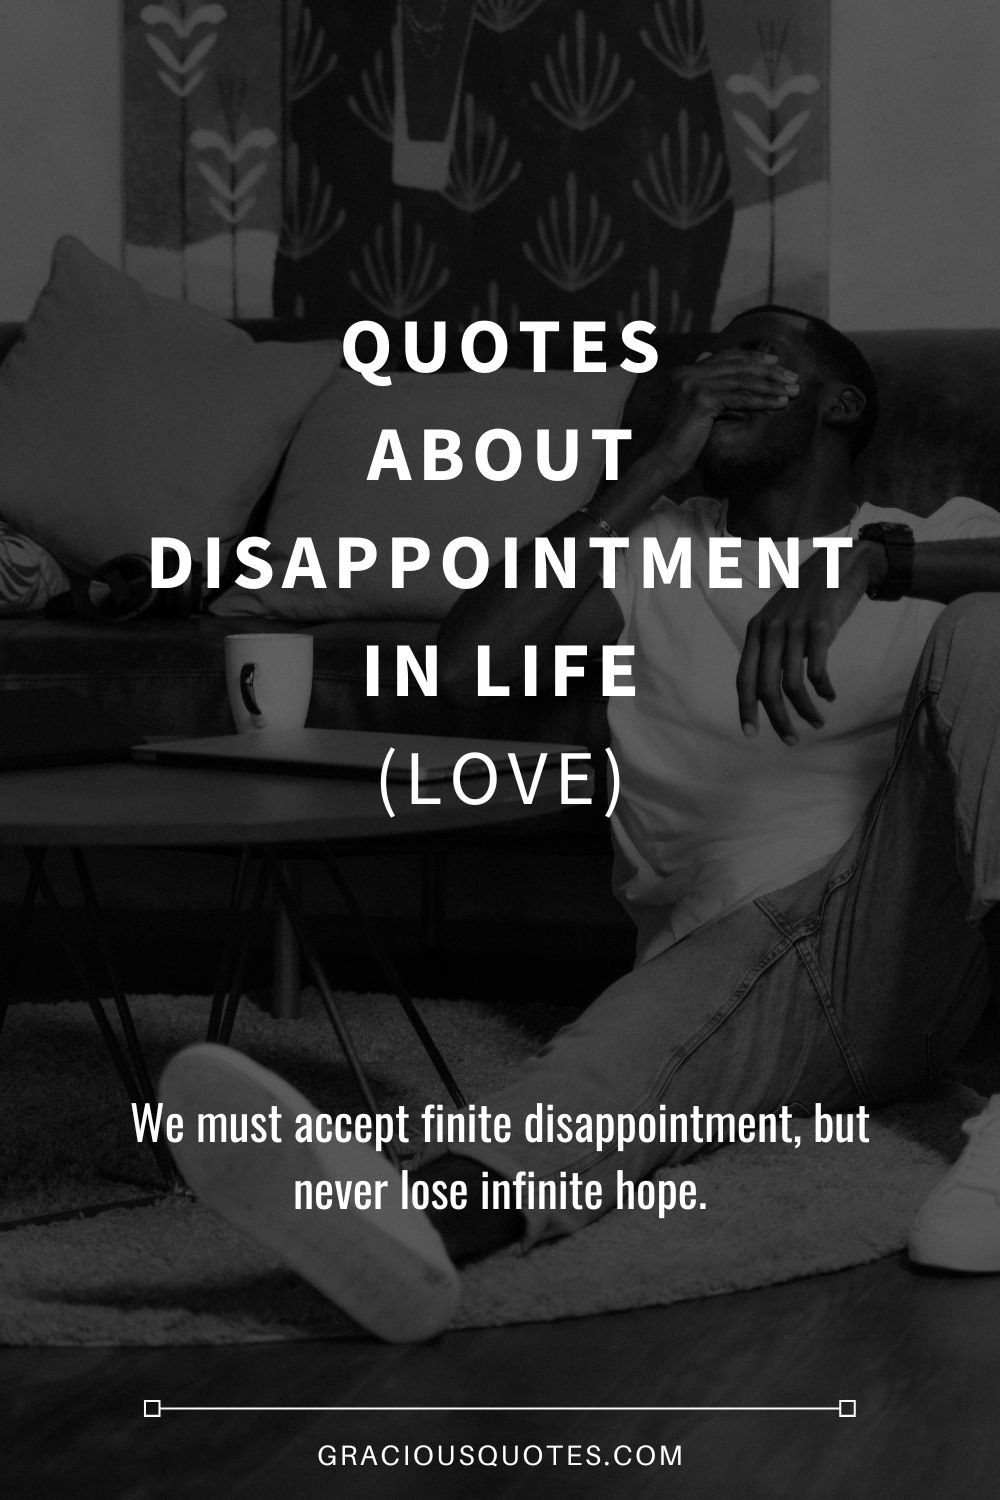 Top 80 Quotes About Disappointment in Life (LOVE)